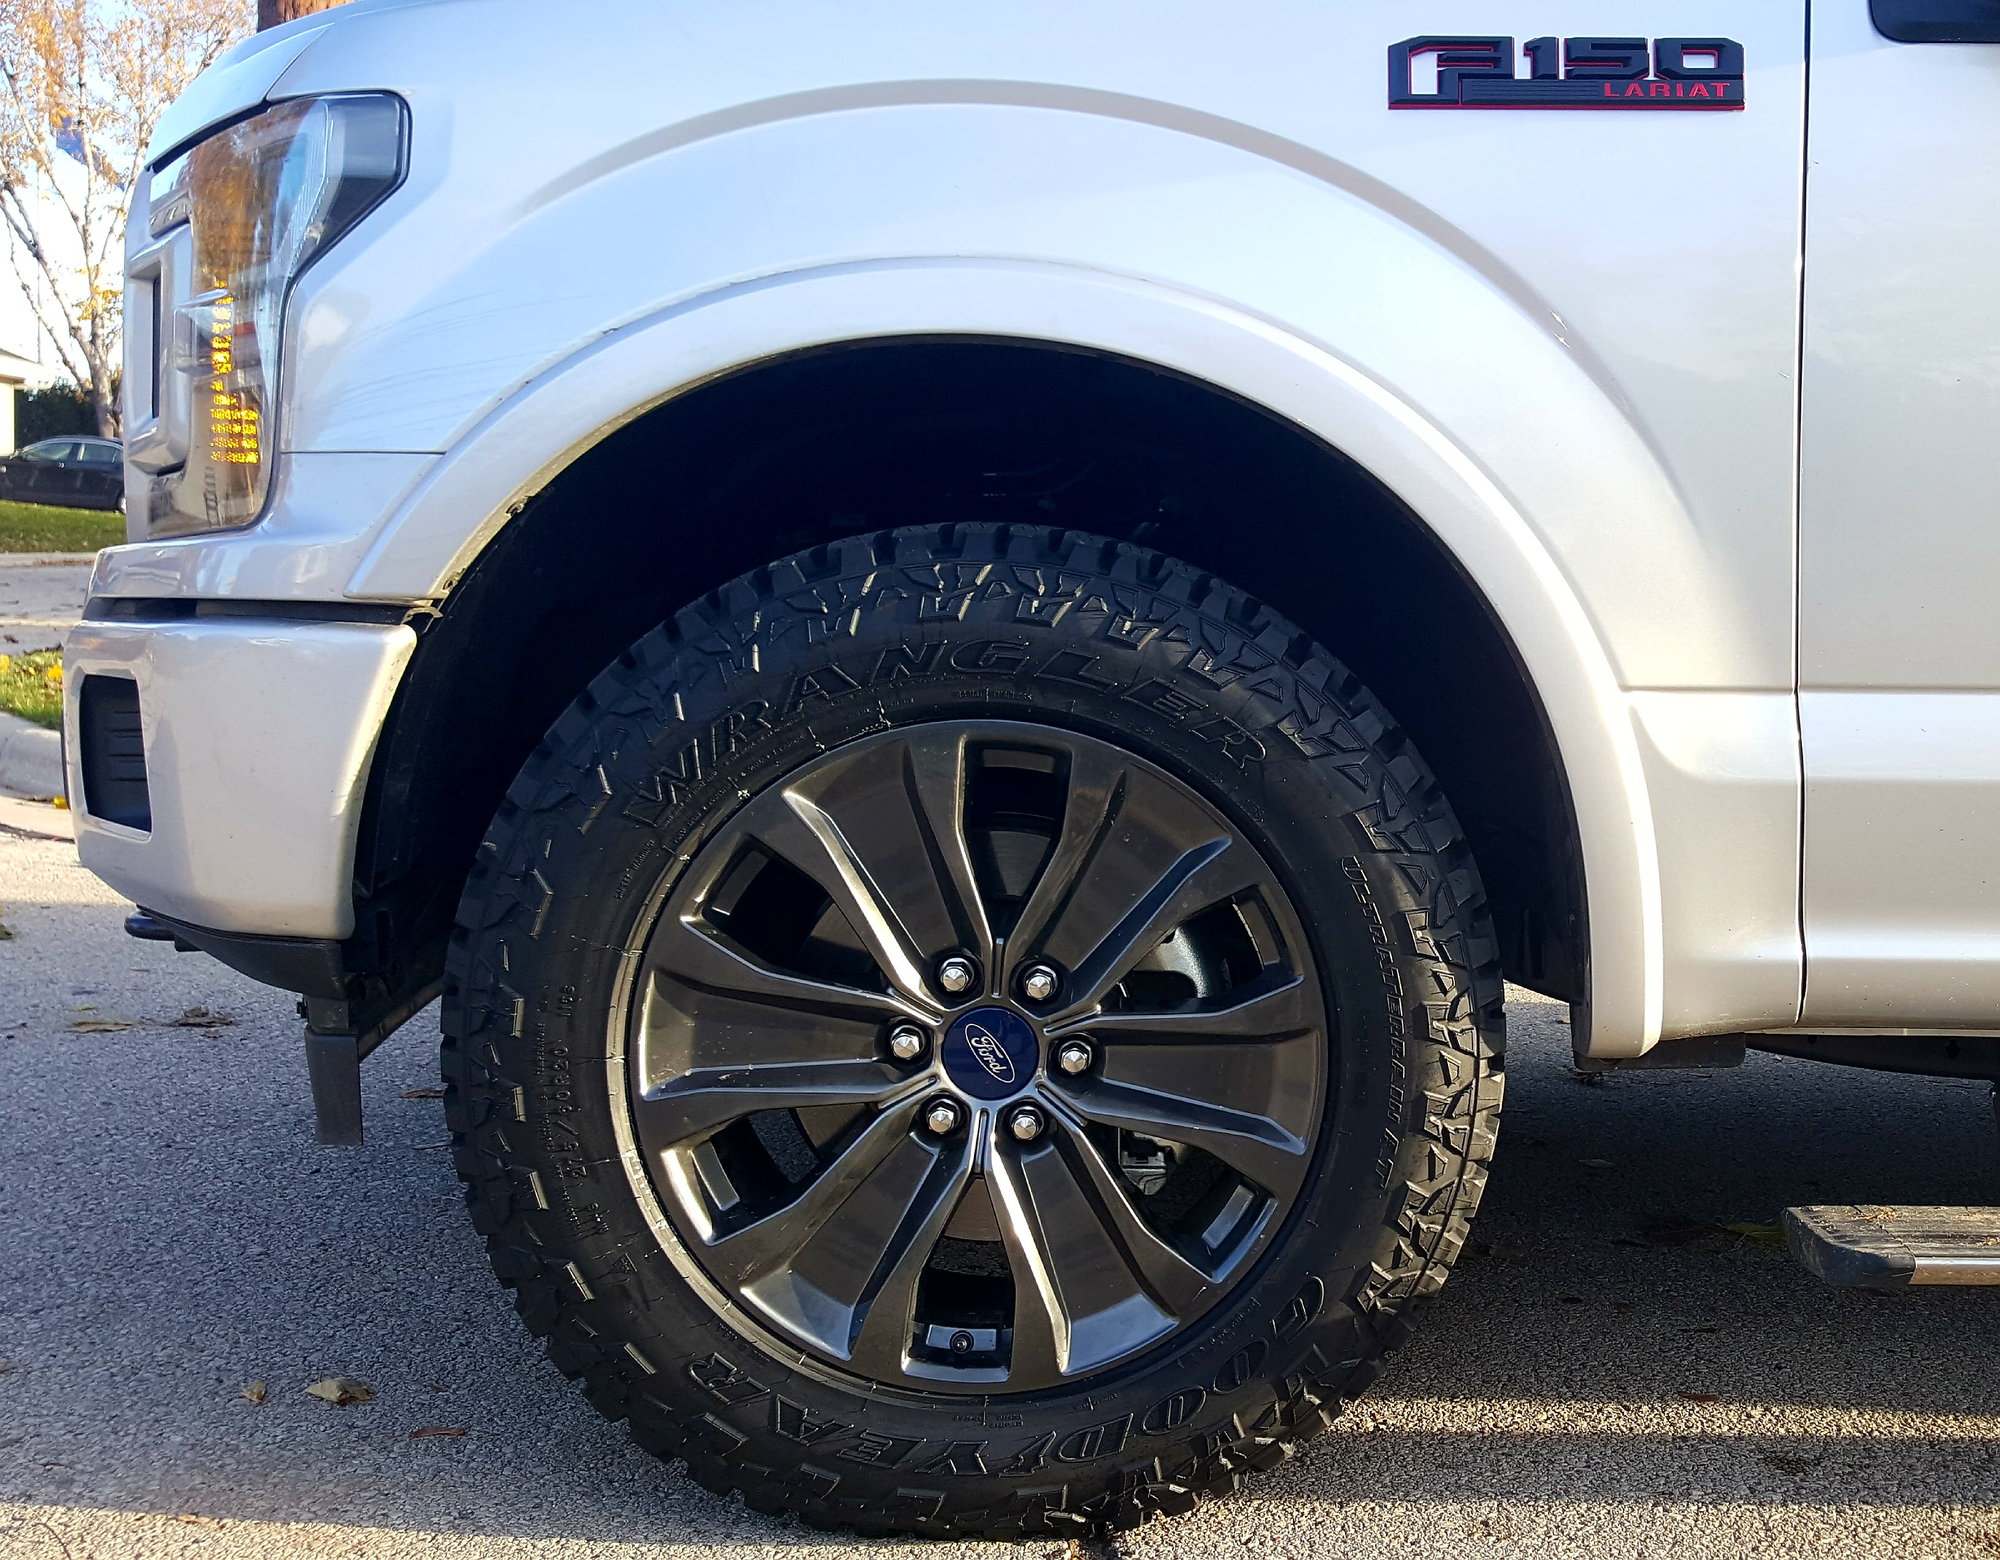 What's your thoughts on this Tire? - Page 7 - Ford F150 Forum - Community  of Ford Truck Fans